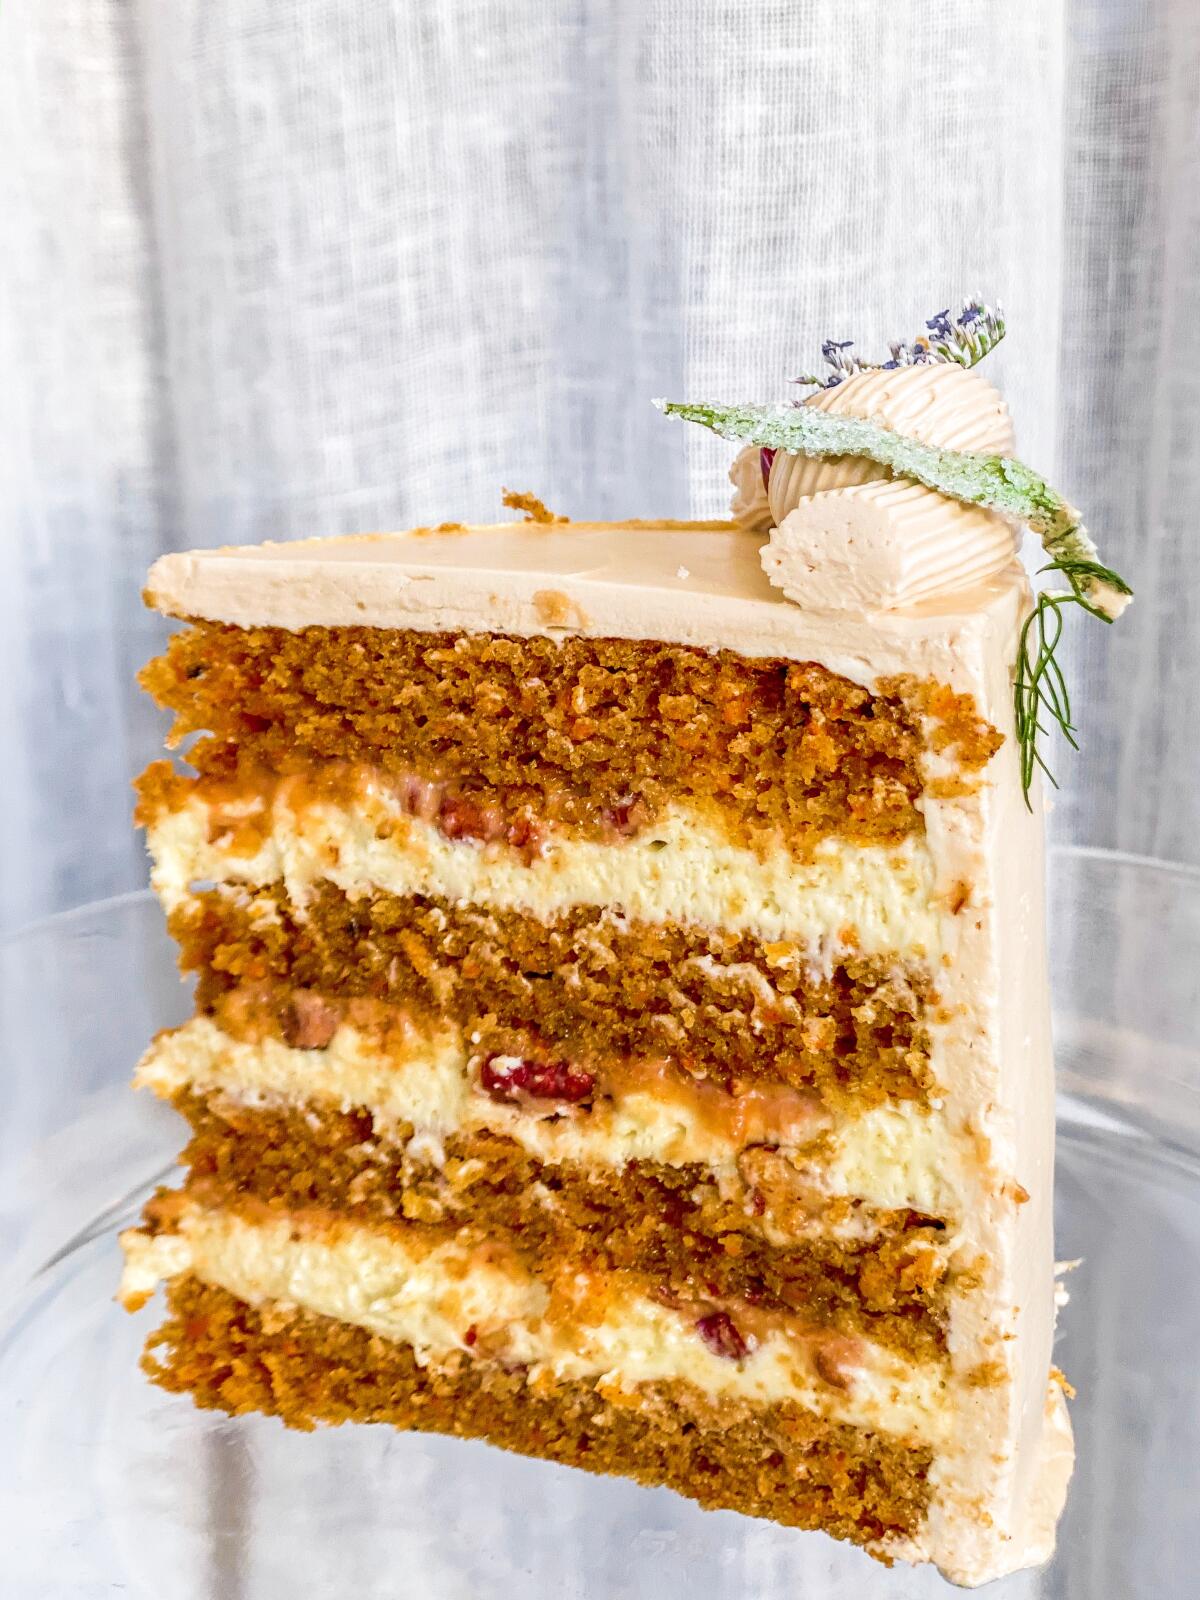 A slice of carrot cake with four layers of cake and icing